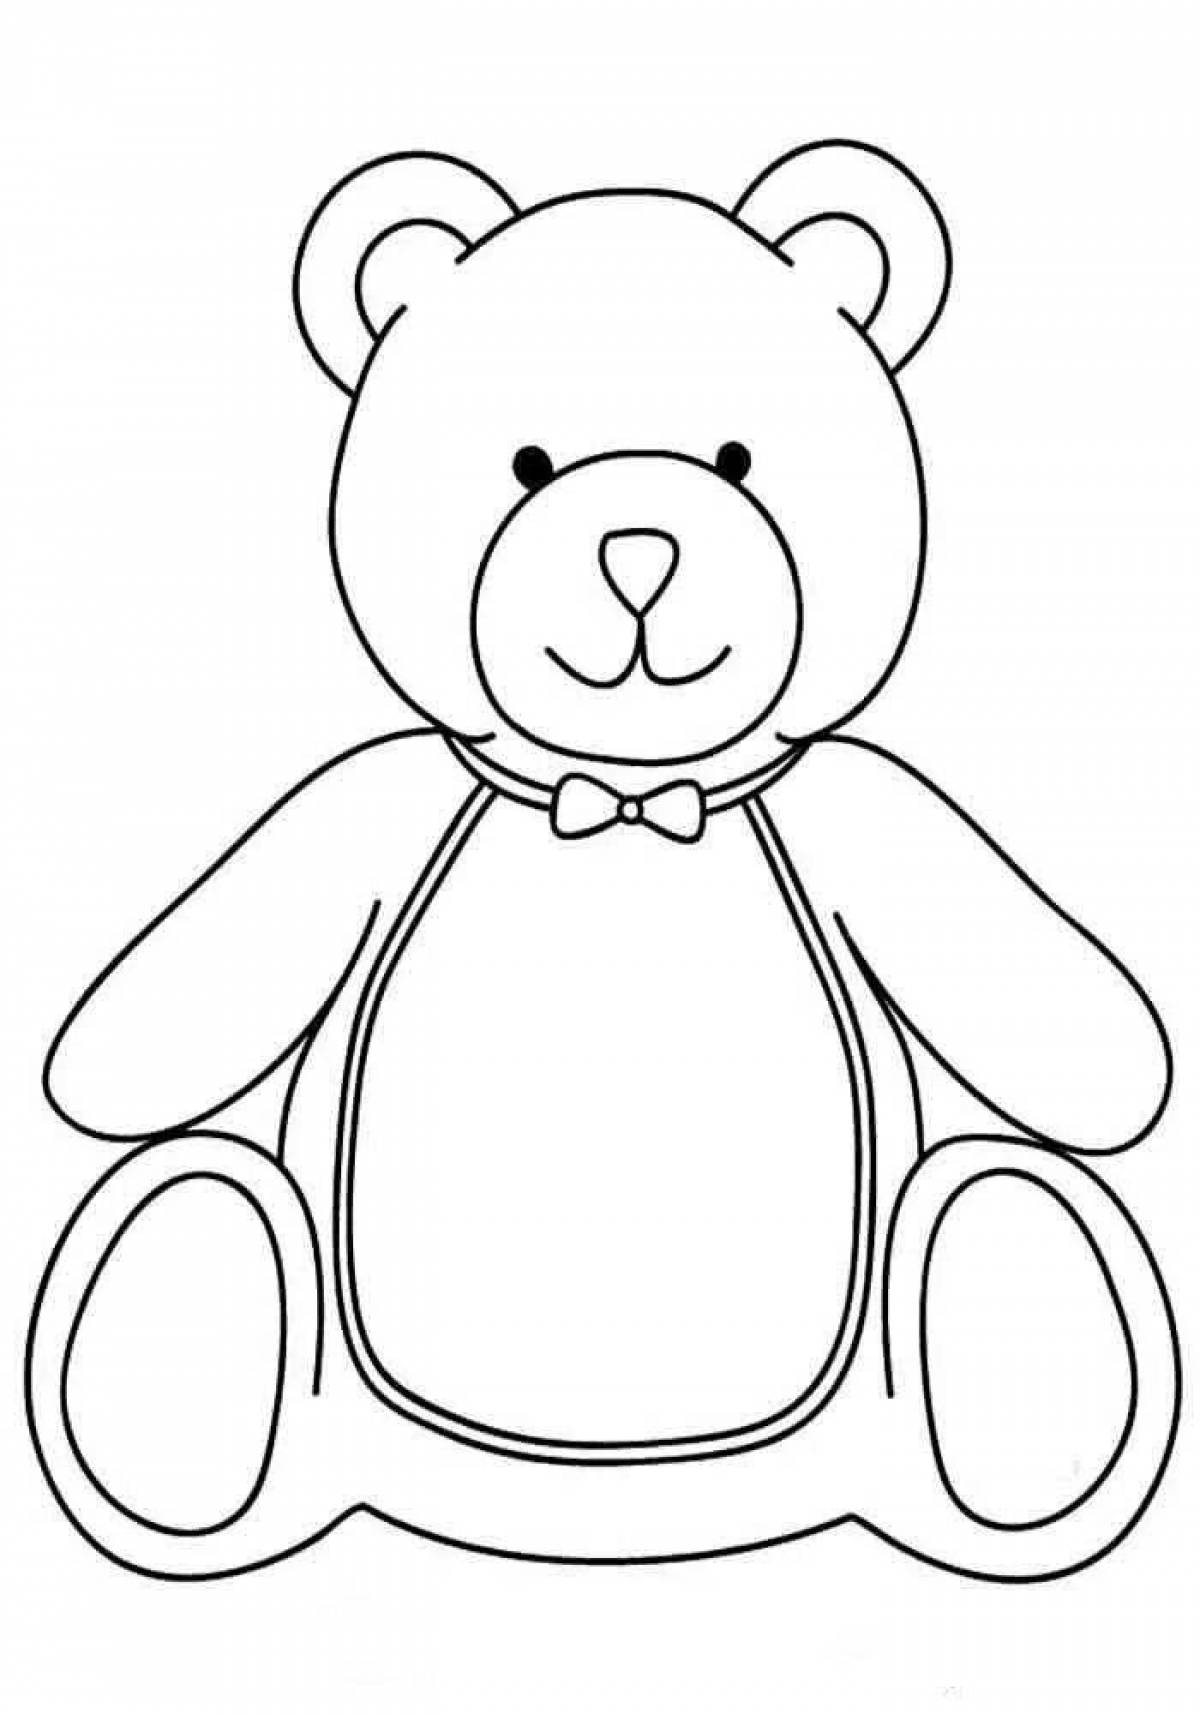 Colorful teddy bear coloring book for kids